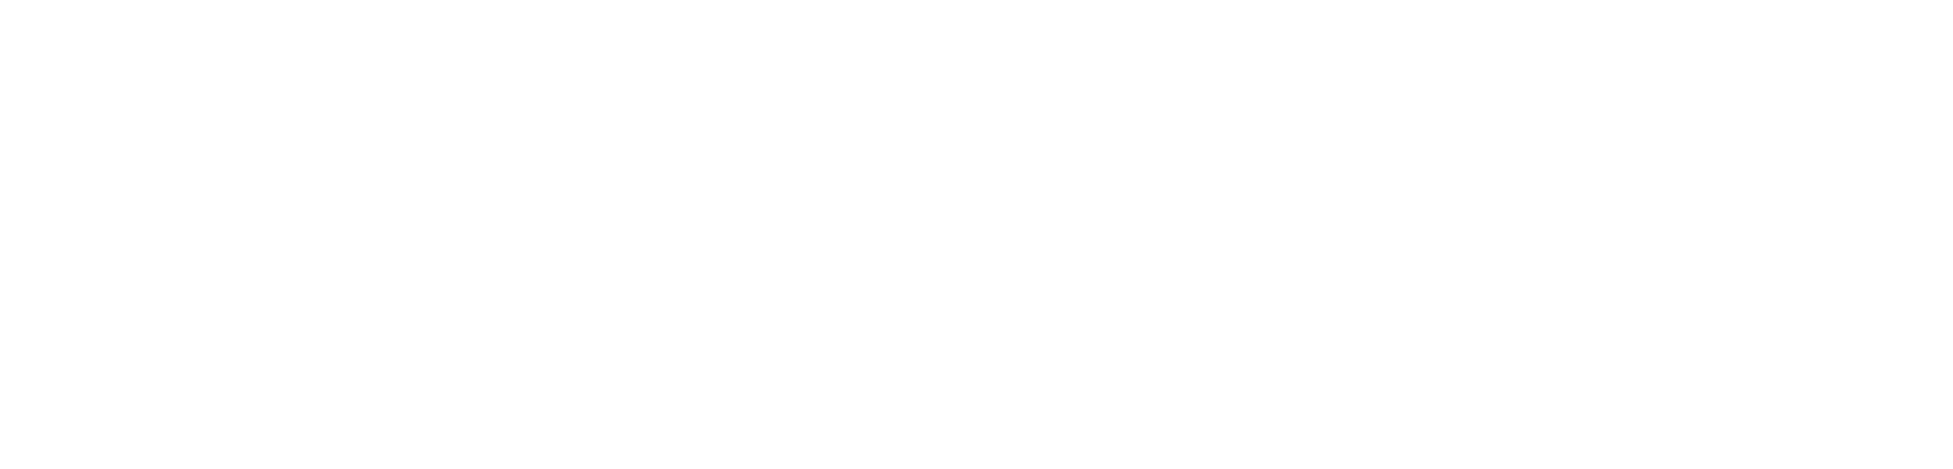 Animation Skillnet is co-funded by Skillnet Ireland and network companies. Skillnet Ireland is funded from the National Training Fund through the Department of Further and Higher Education, Research, Innovation and Science, and the European Union